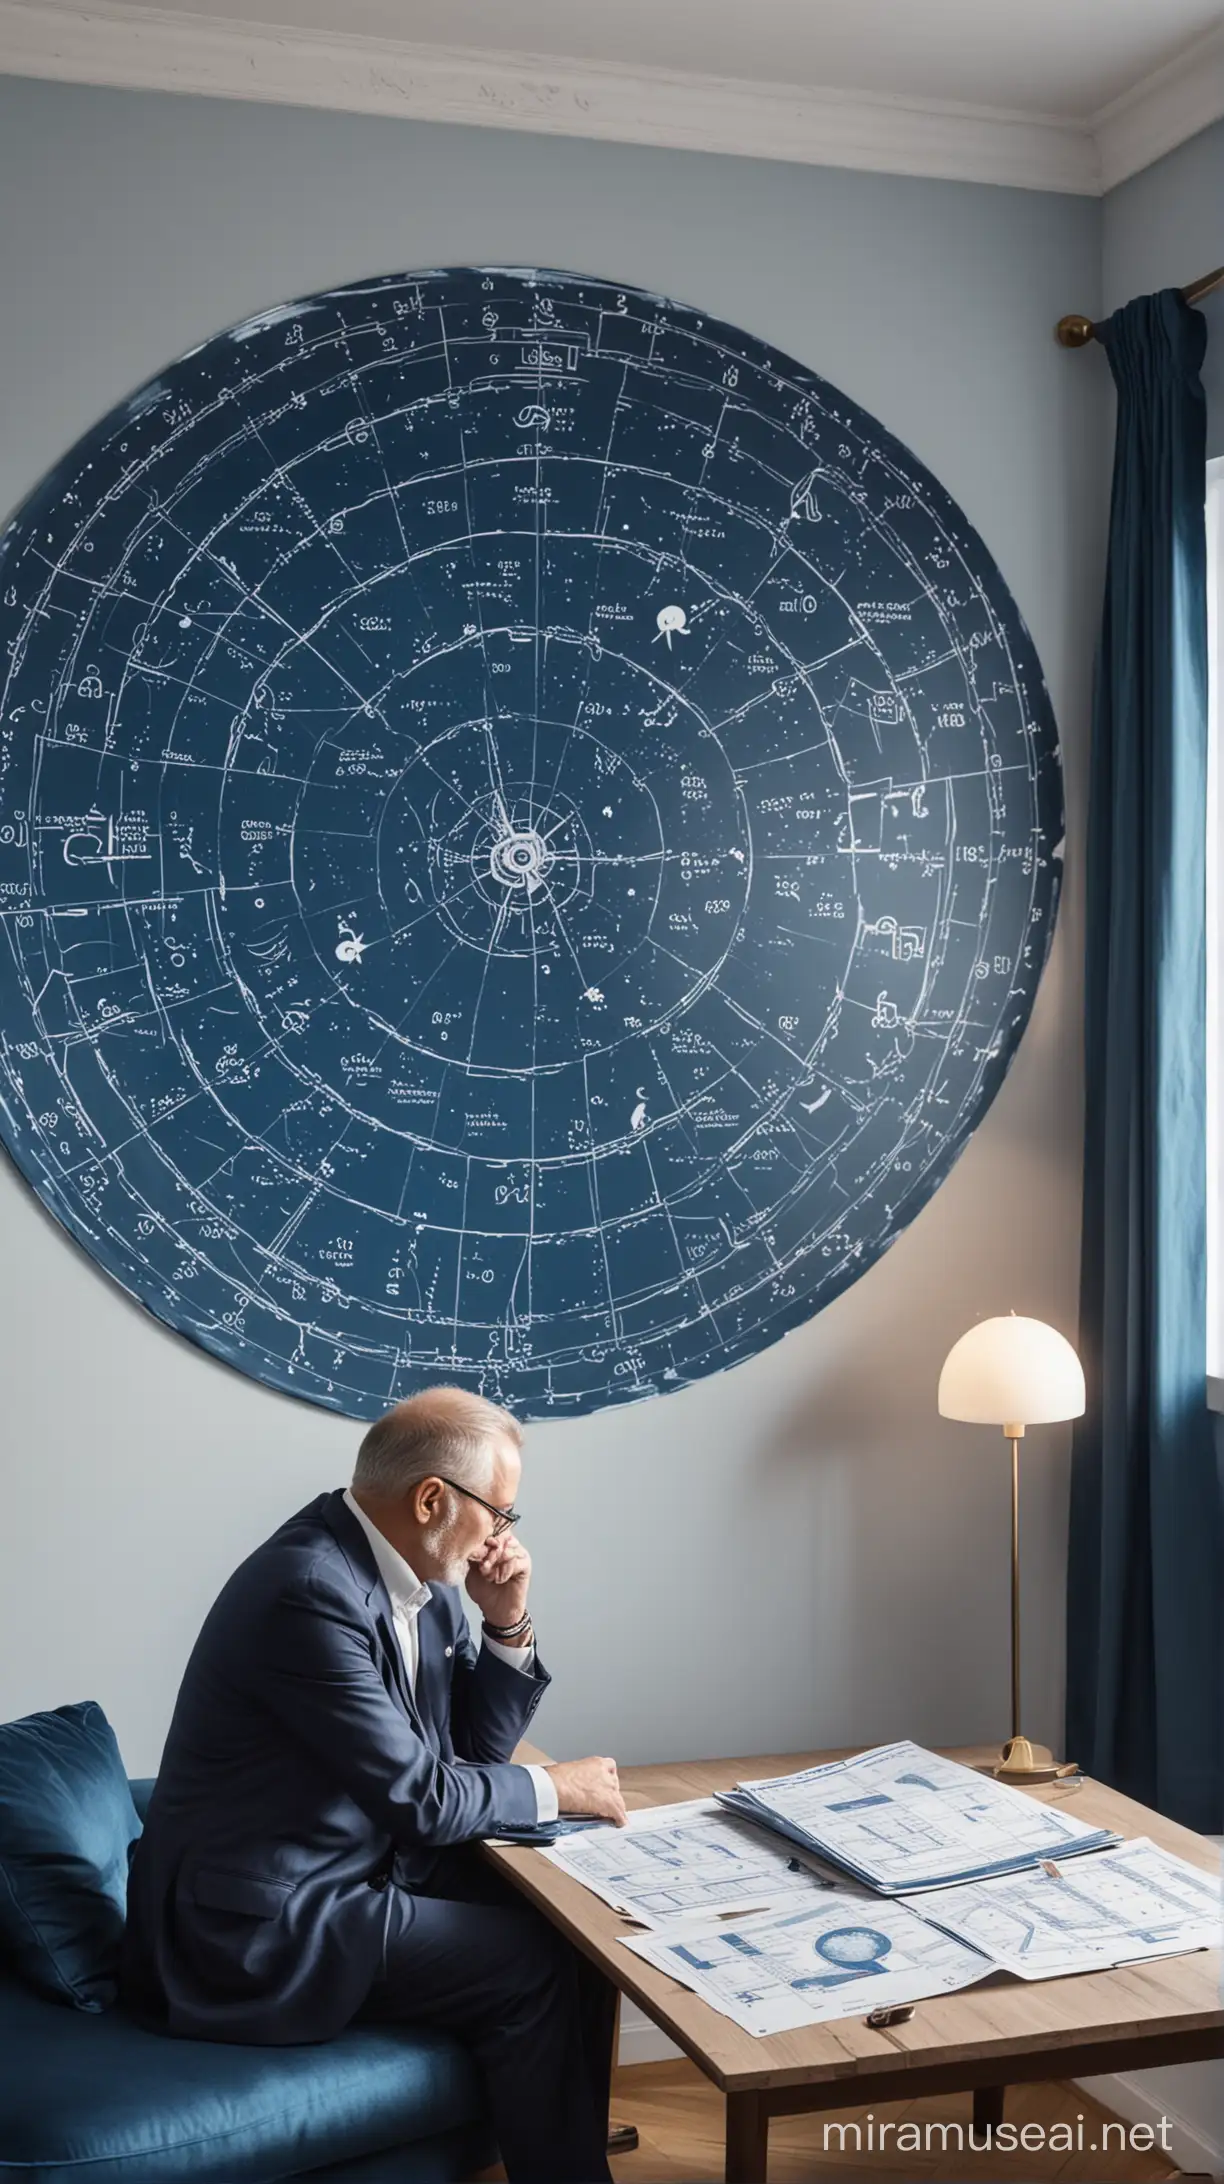 Astrology Enthusiast Contemplating Zodiac Signs in Stylish Blue and White Interior